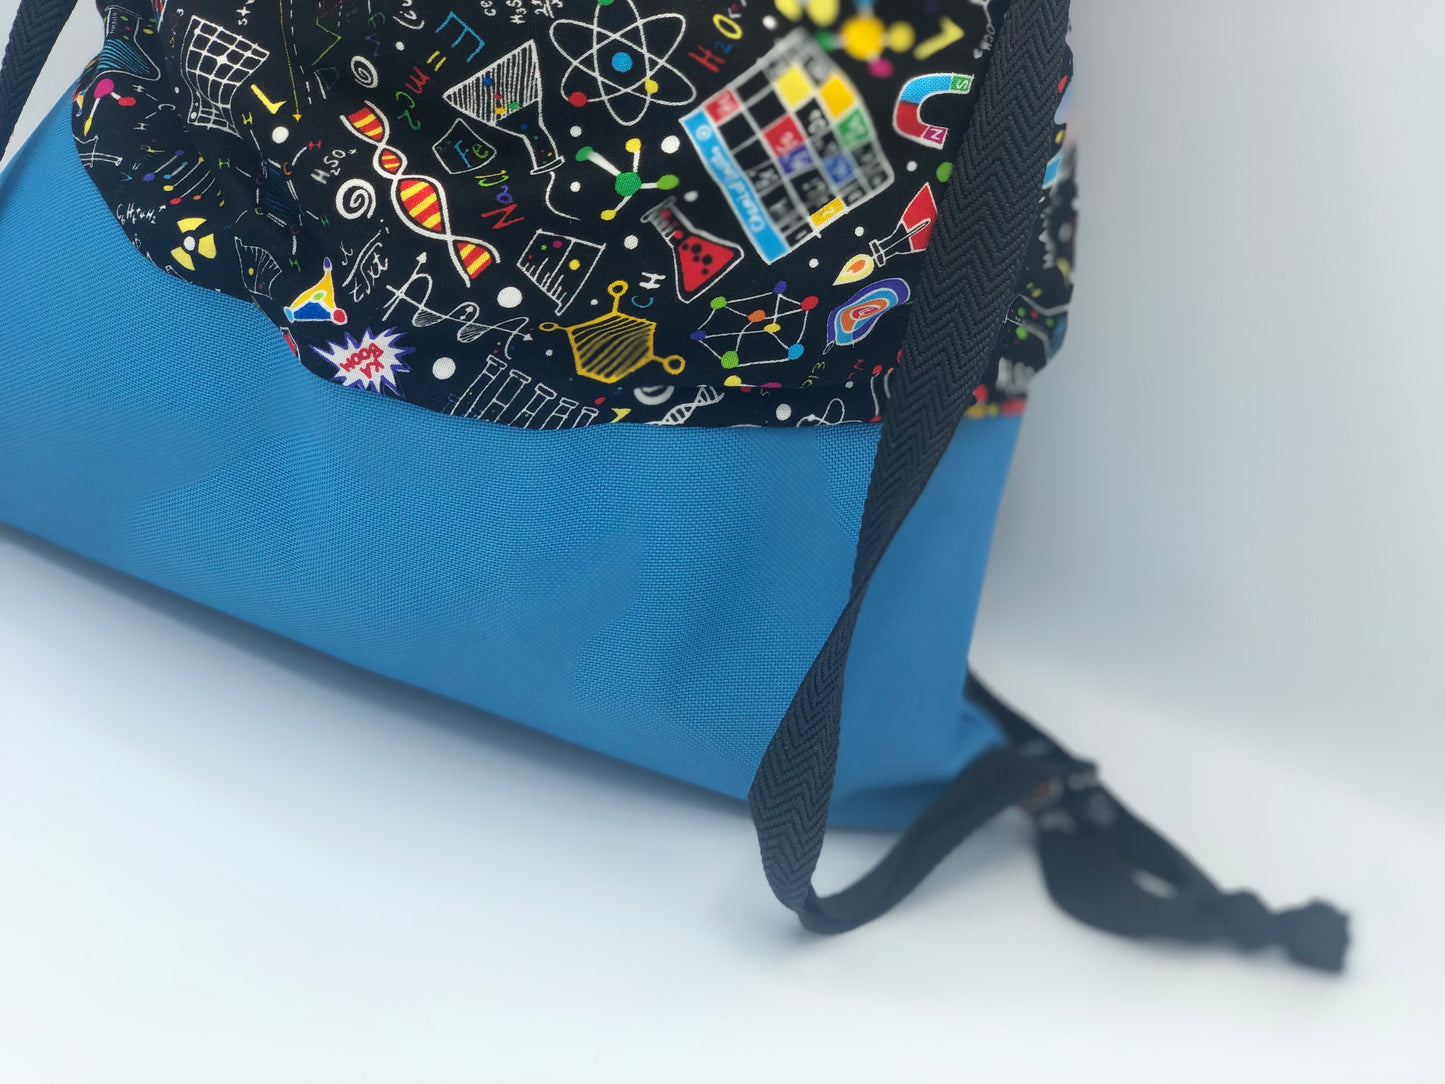 Backpack style bag - cool science fabric with waterproof bottom